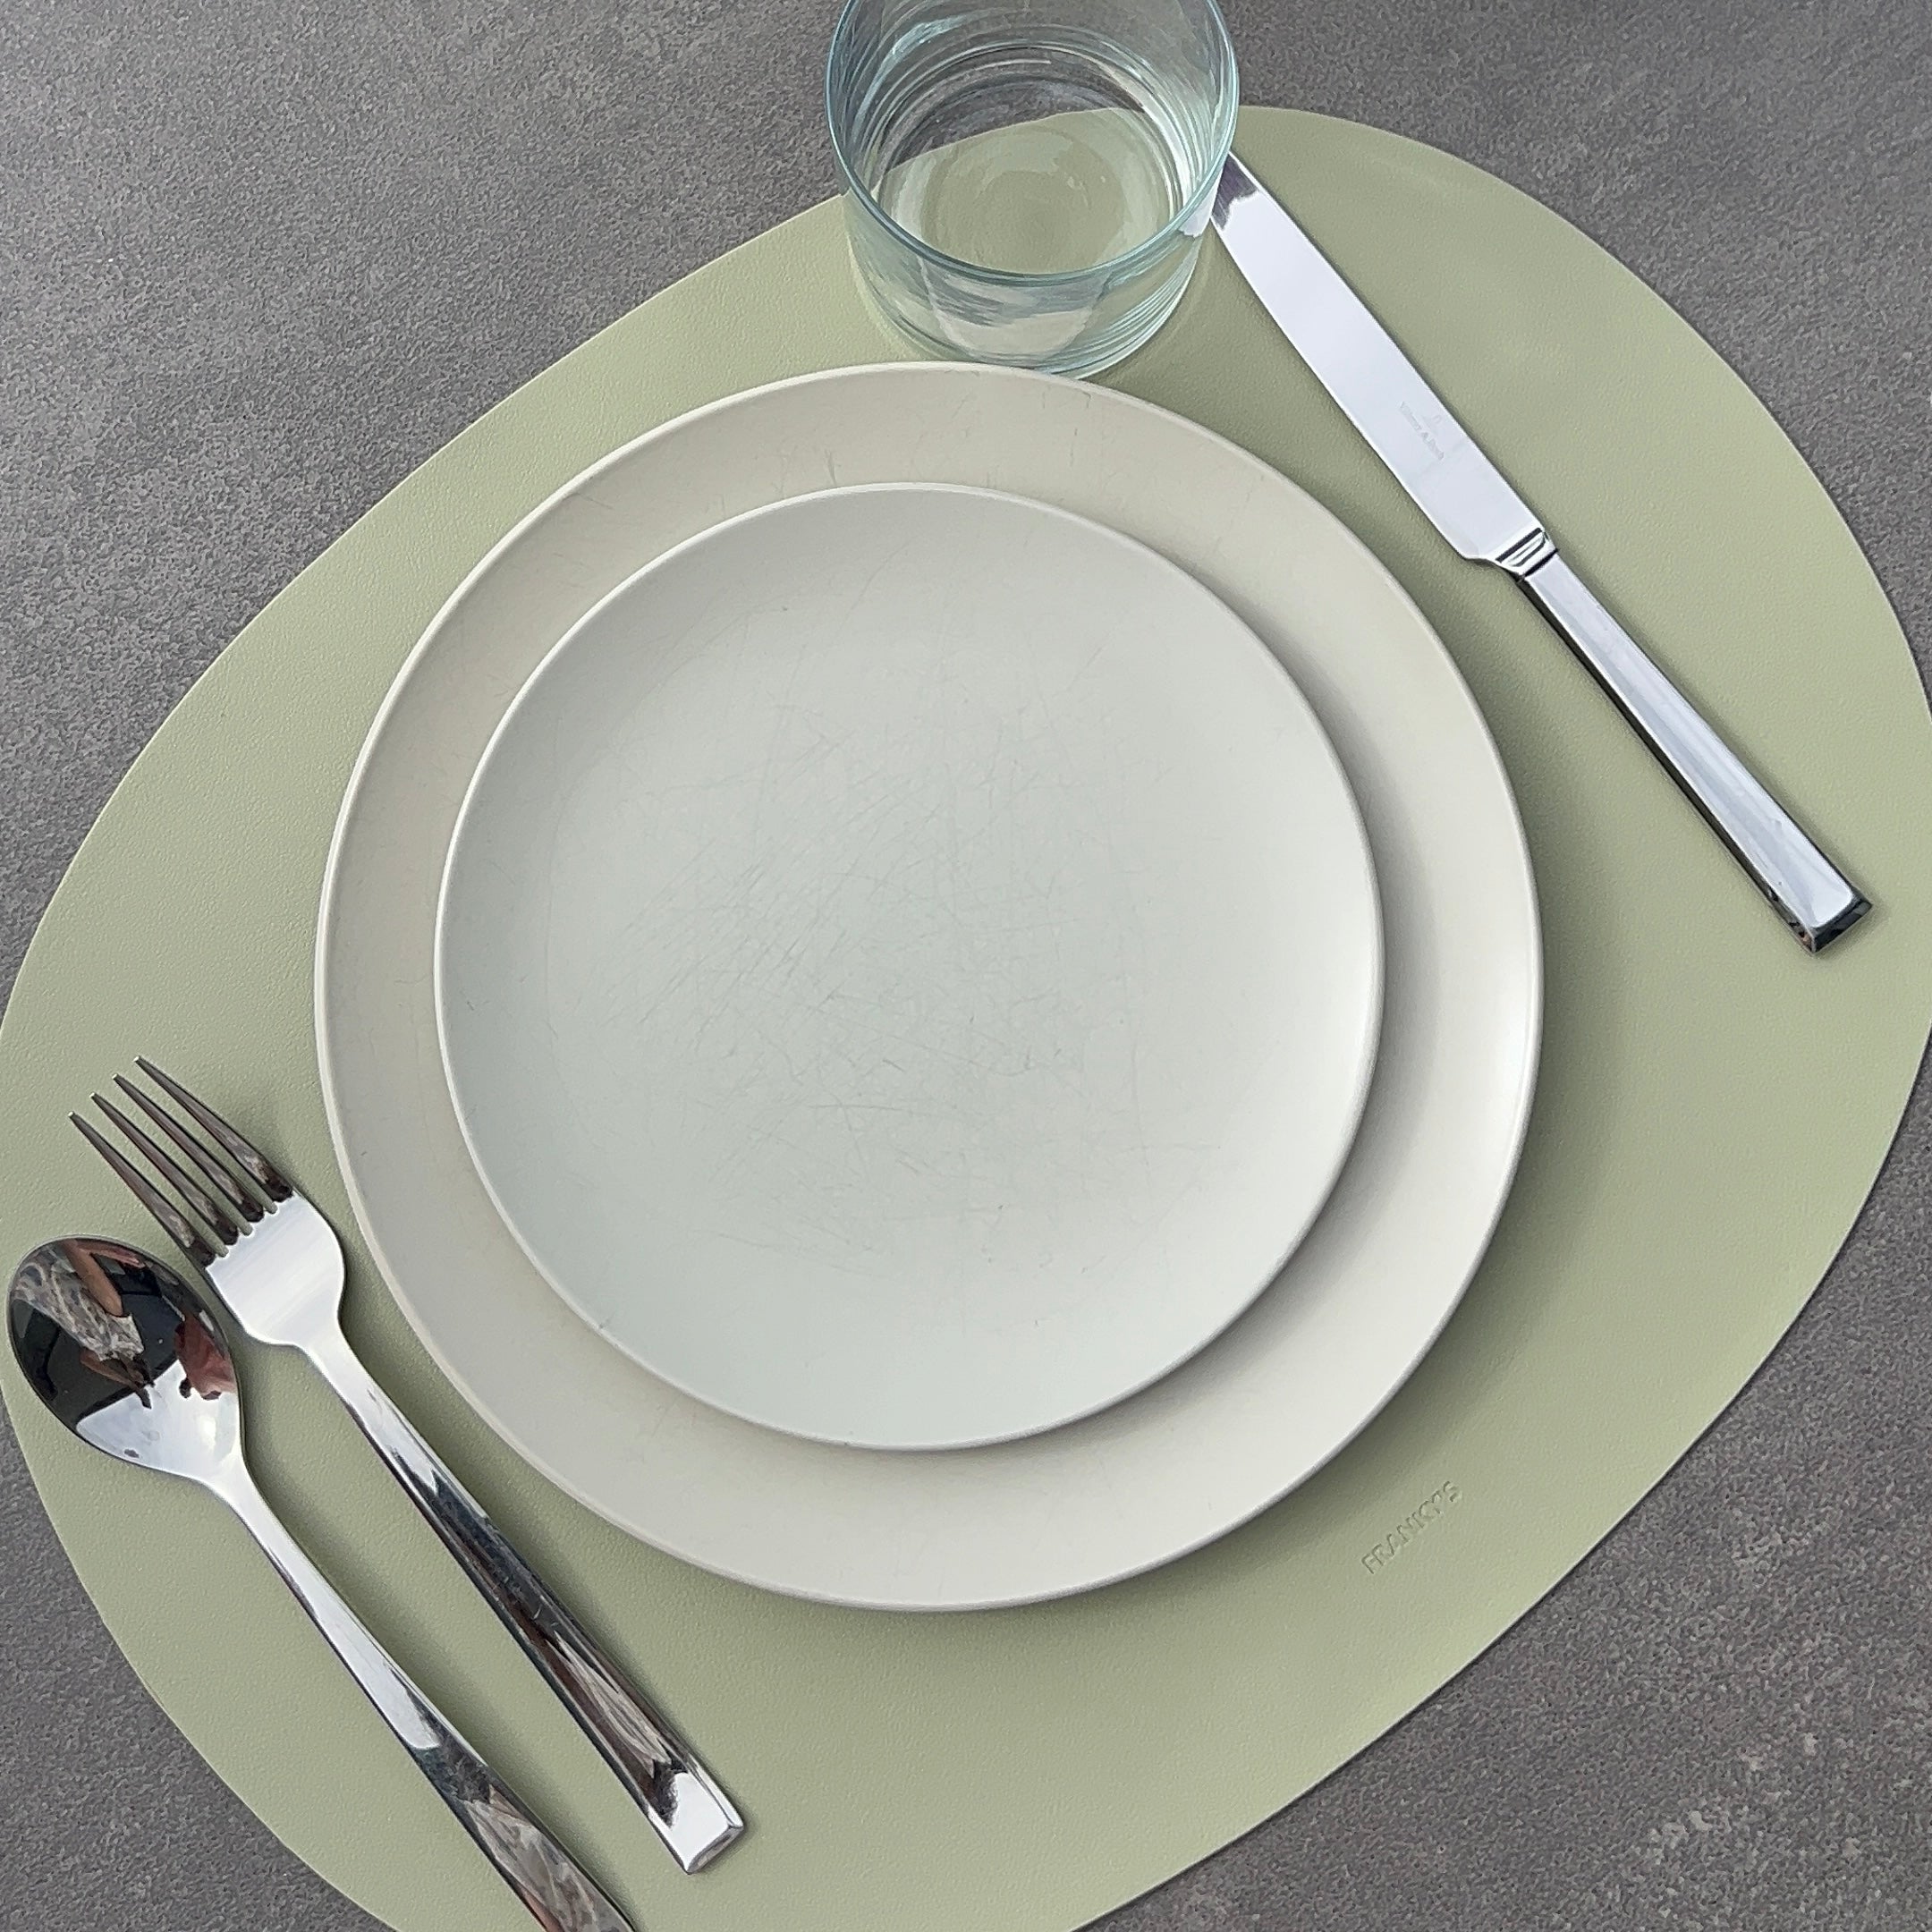 Lorient Grande Placemat - Buy Placemats Online at FRANKY'S